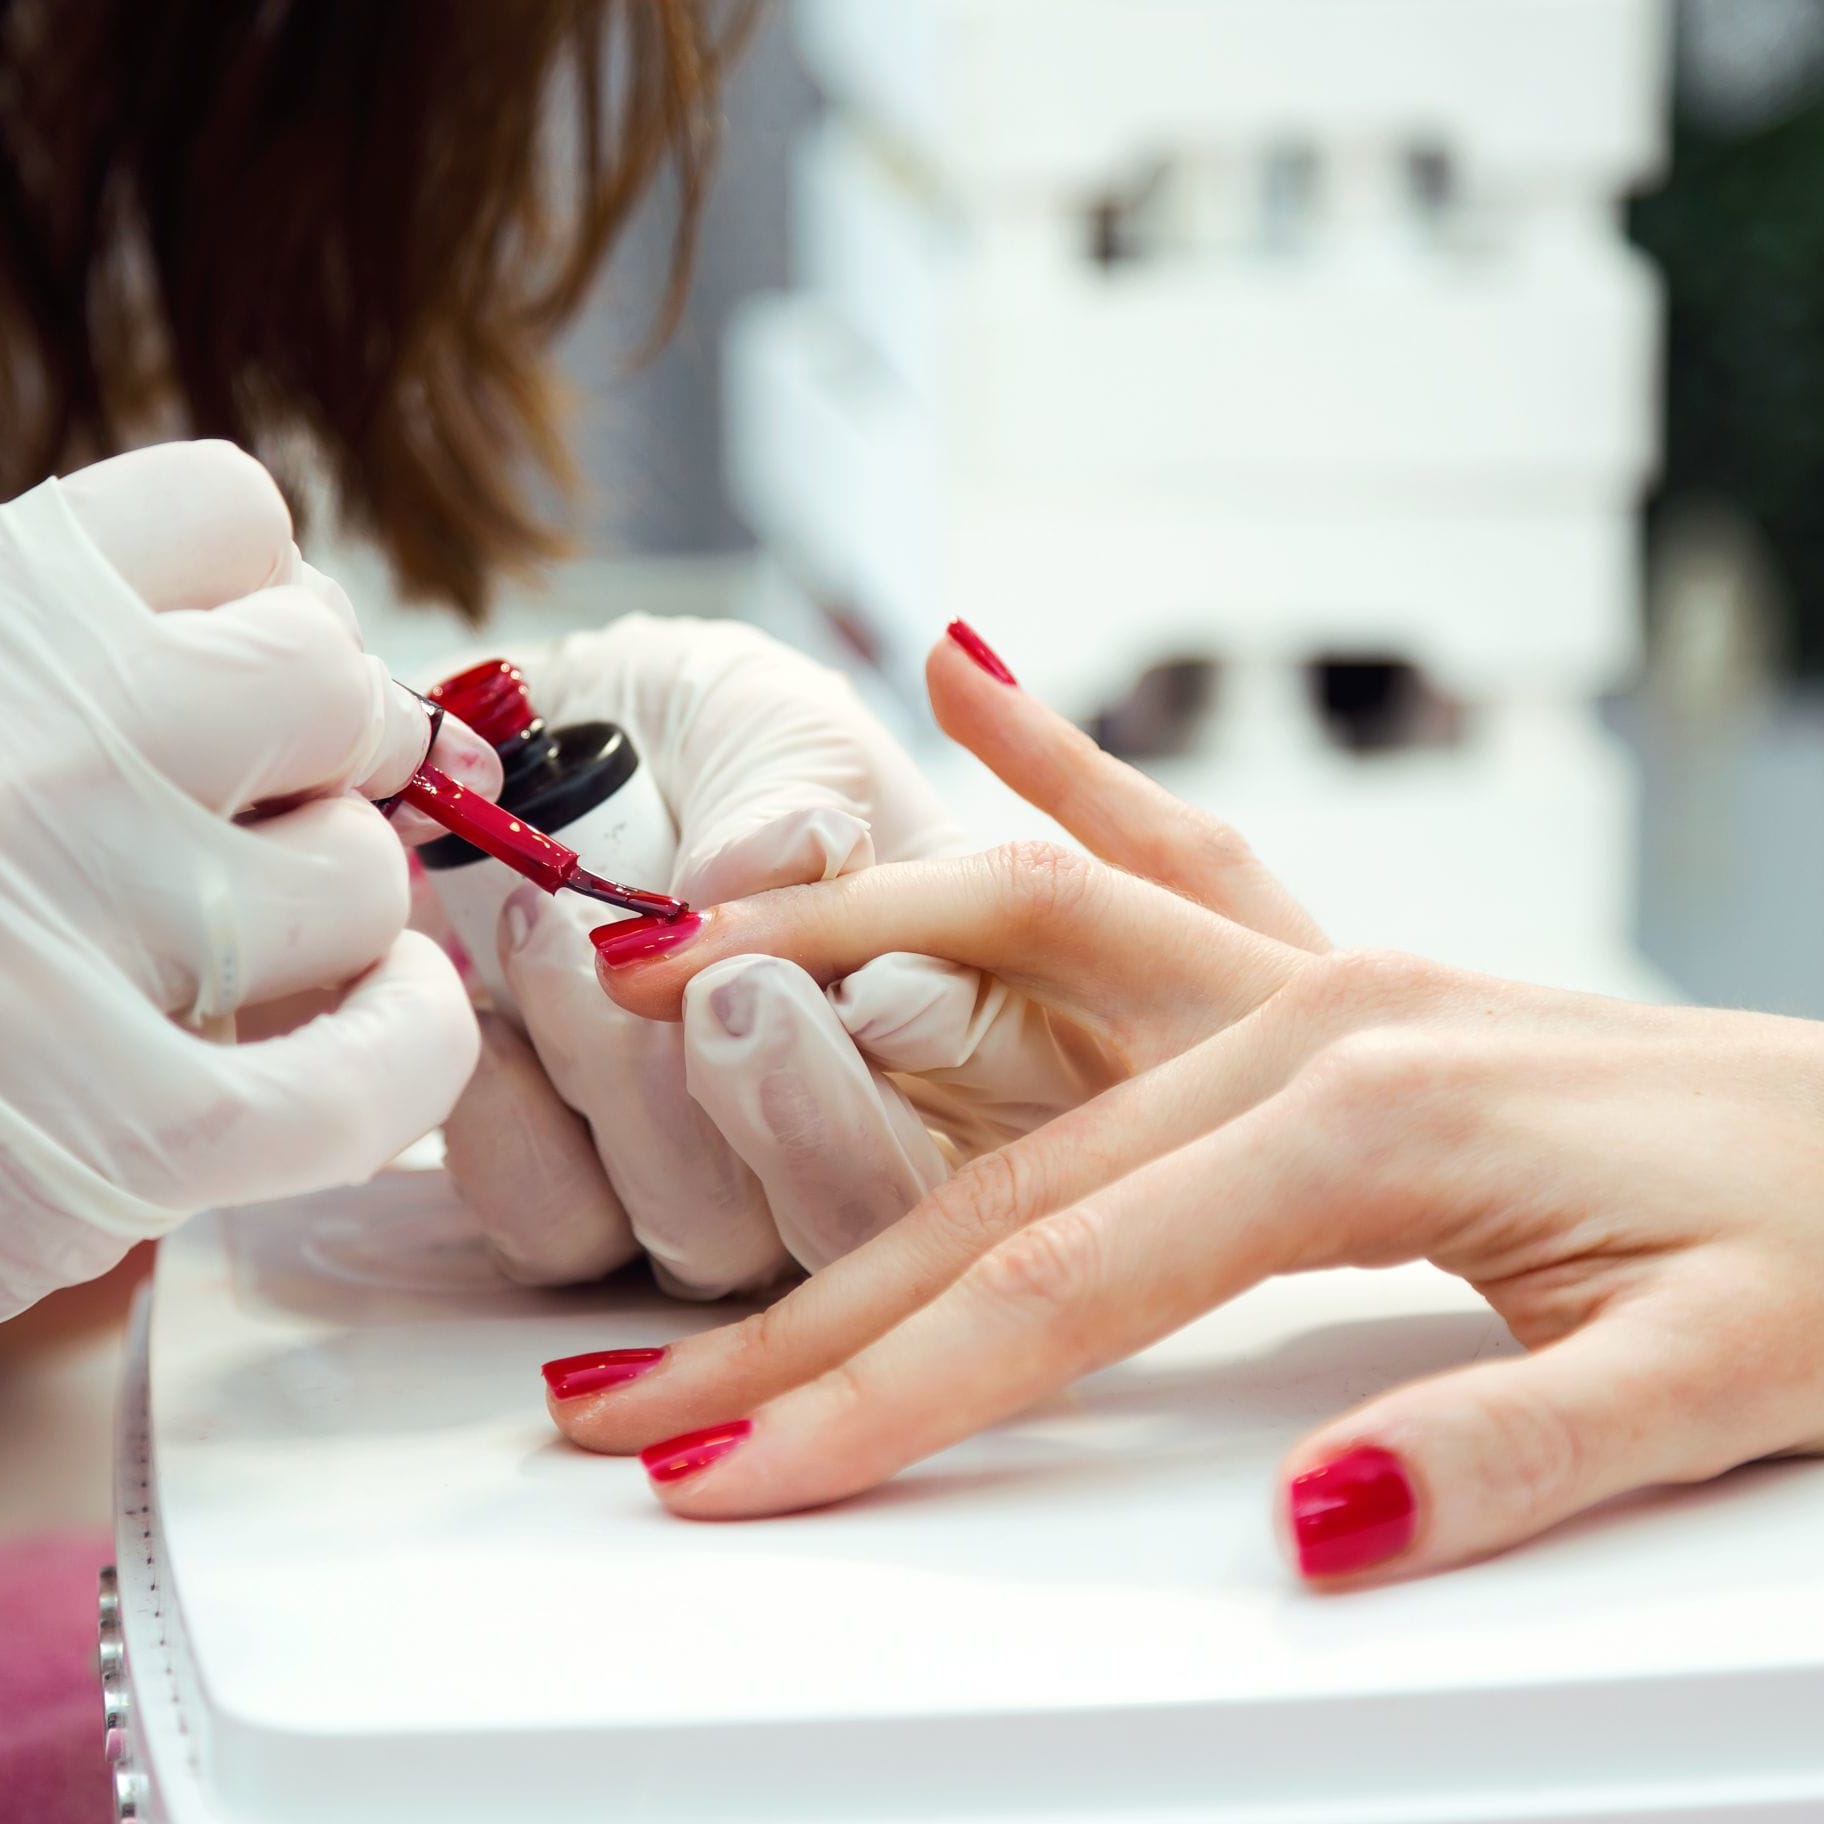 Gel Manicure with Return Soak Off + Classic Pedicure with Foot Soak (2 Sessions) at Belle Lady - Get Deals, Cashback and Rewards with ShopBack GO